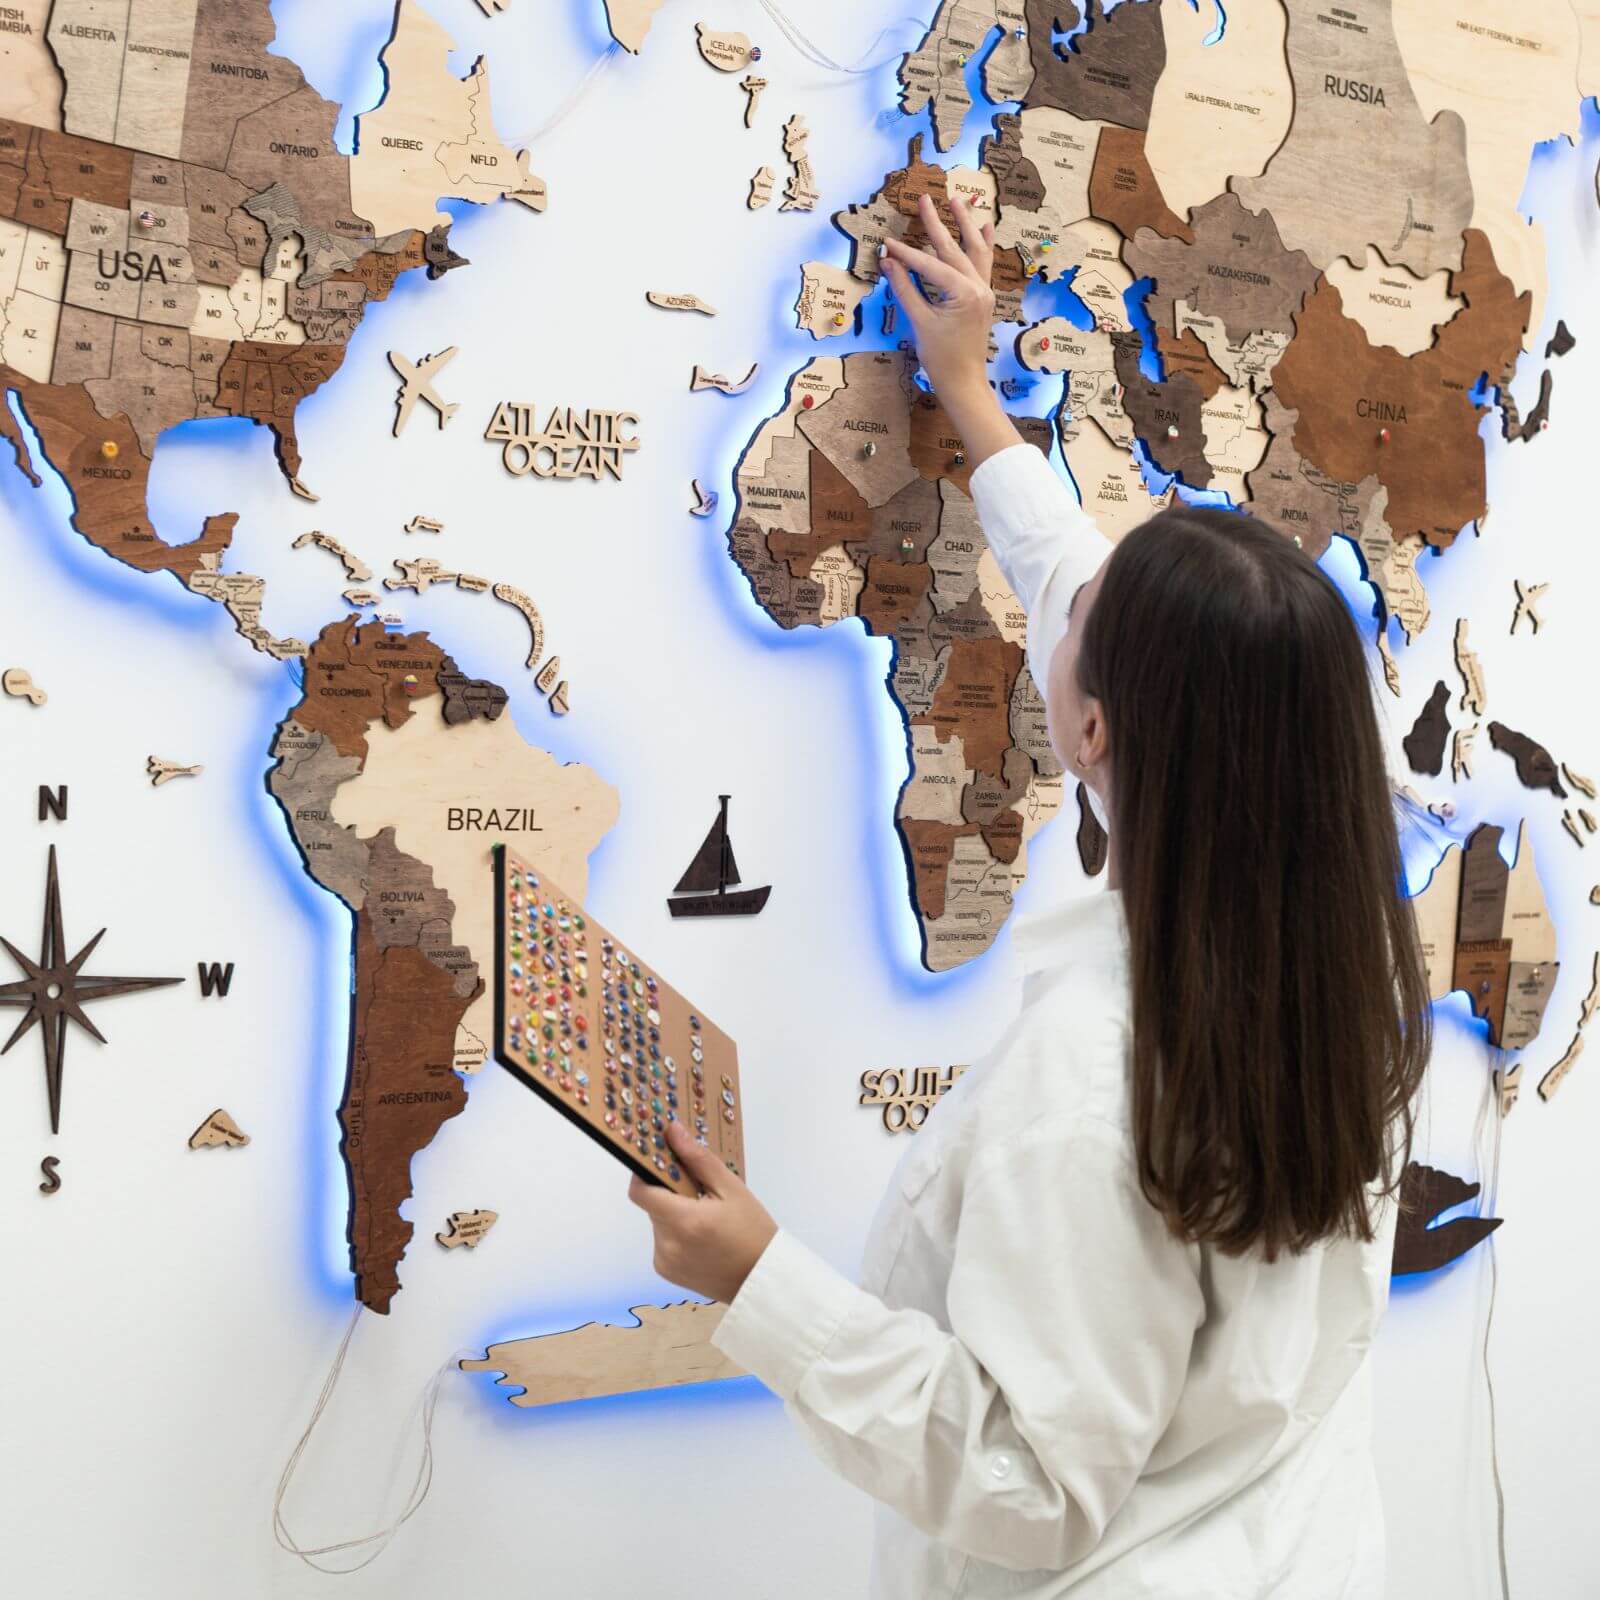 3D LED Wooden World Map from Enjoy The Wood ‣ Good Price, Reviews